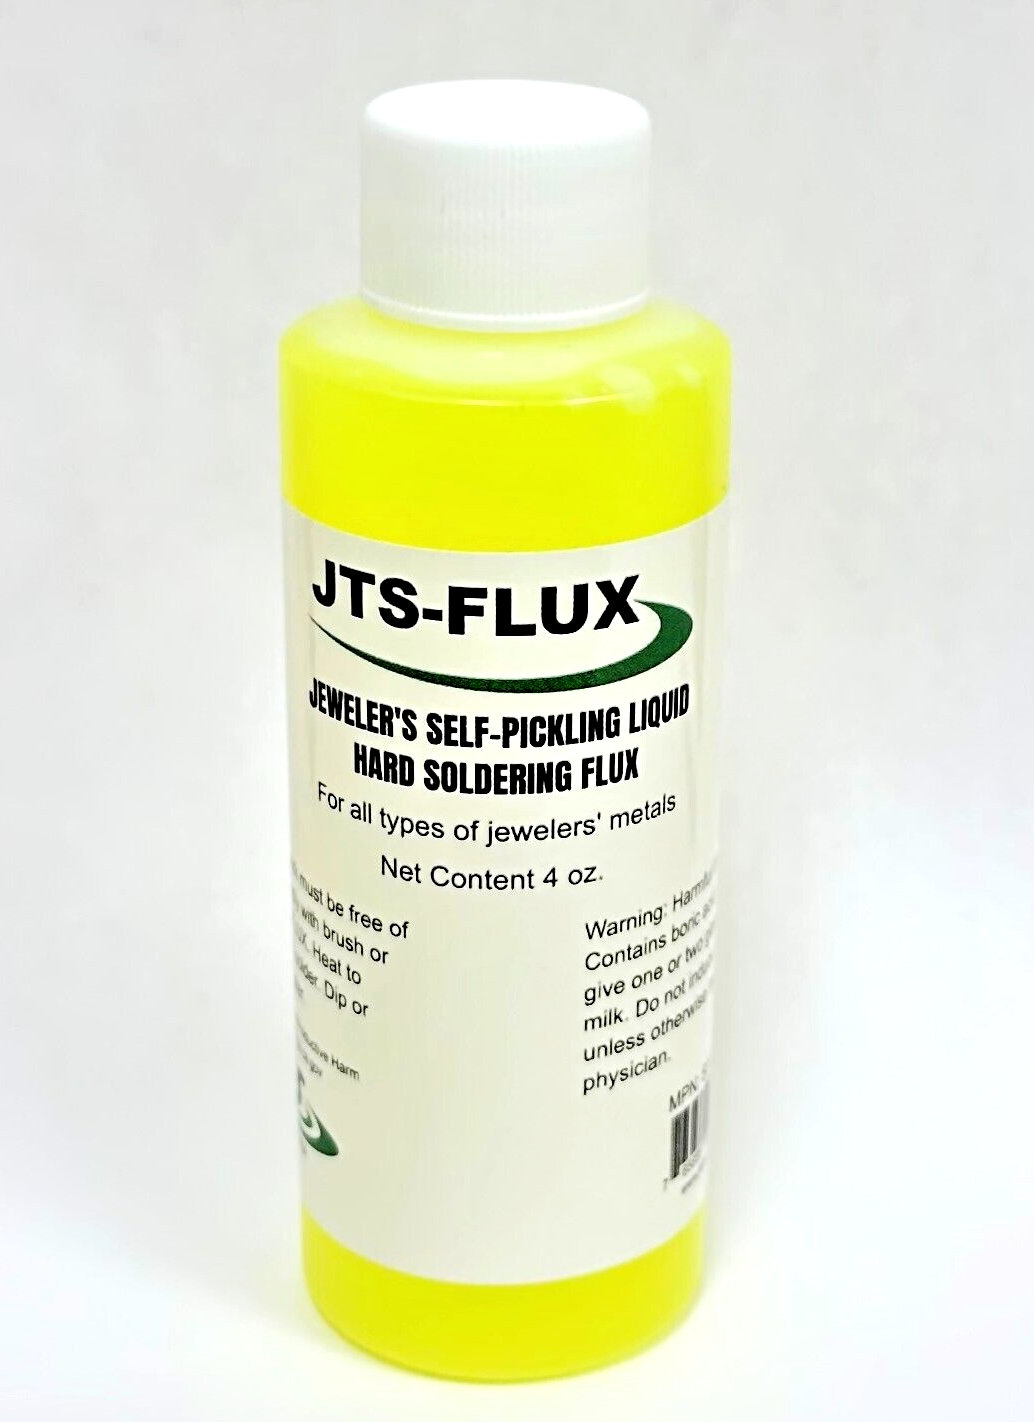 Flux, Classic 100 Gel for Stained Glass and Soldering, 8 Oz Bottle